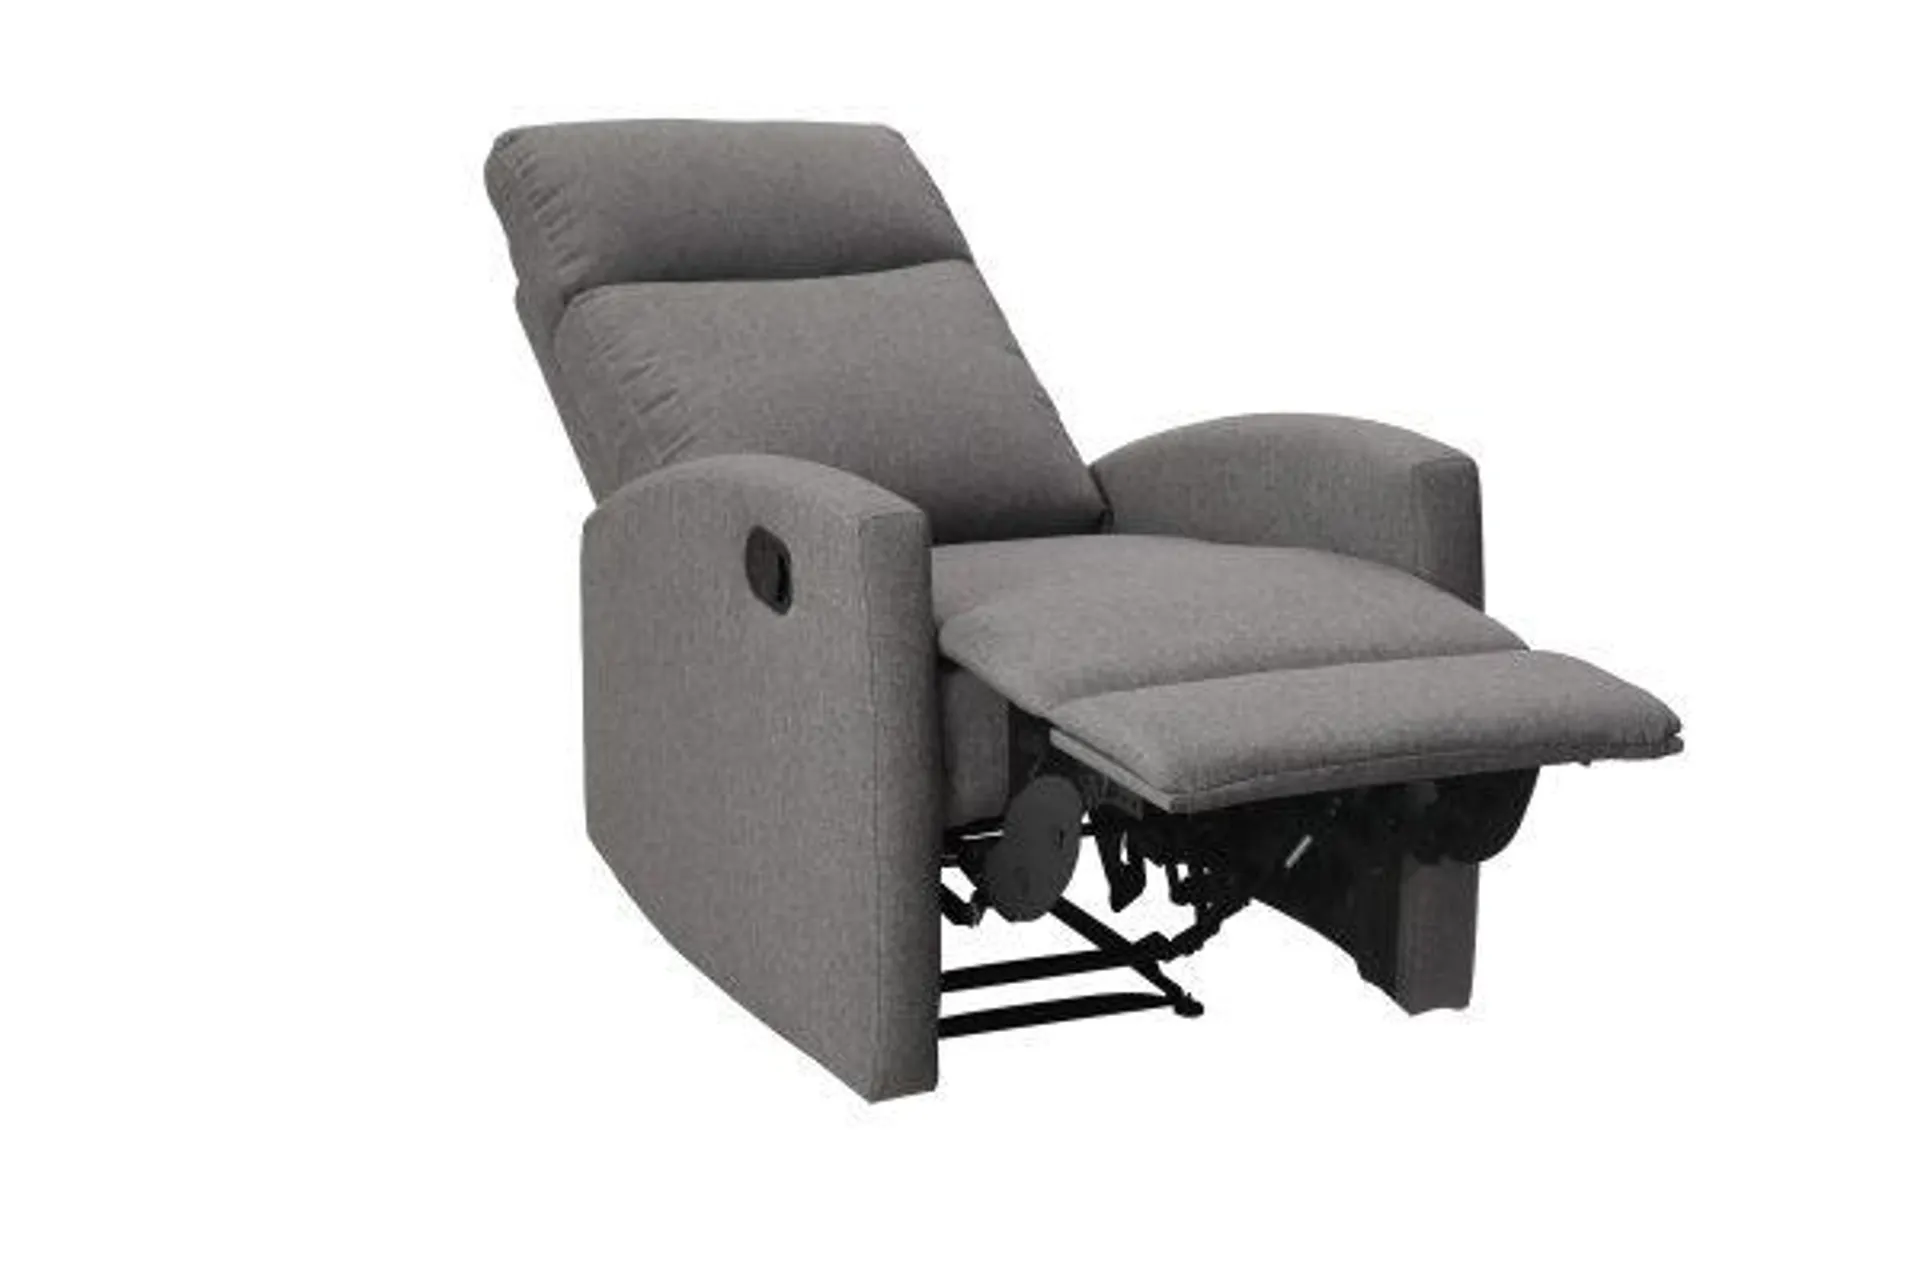 Fauteuil relaxation inclinable